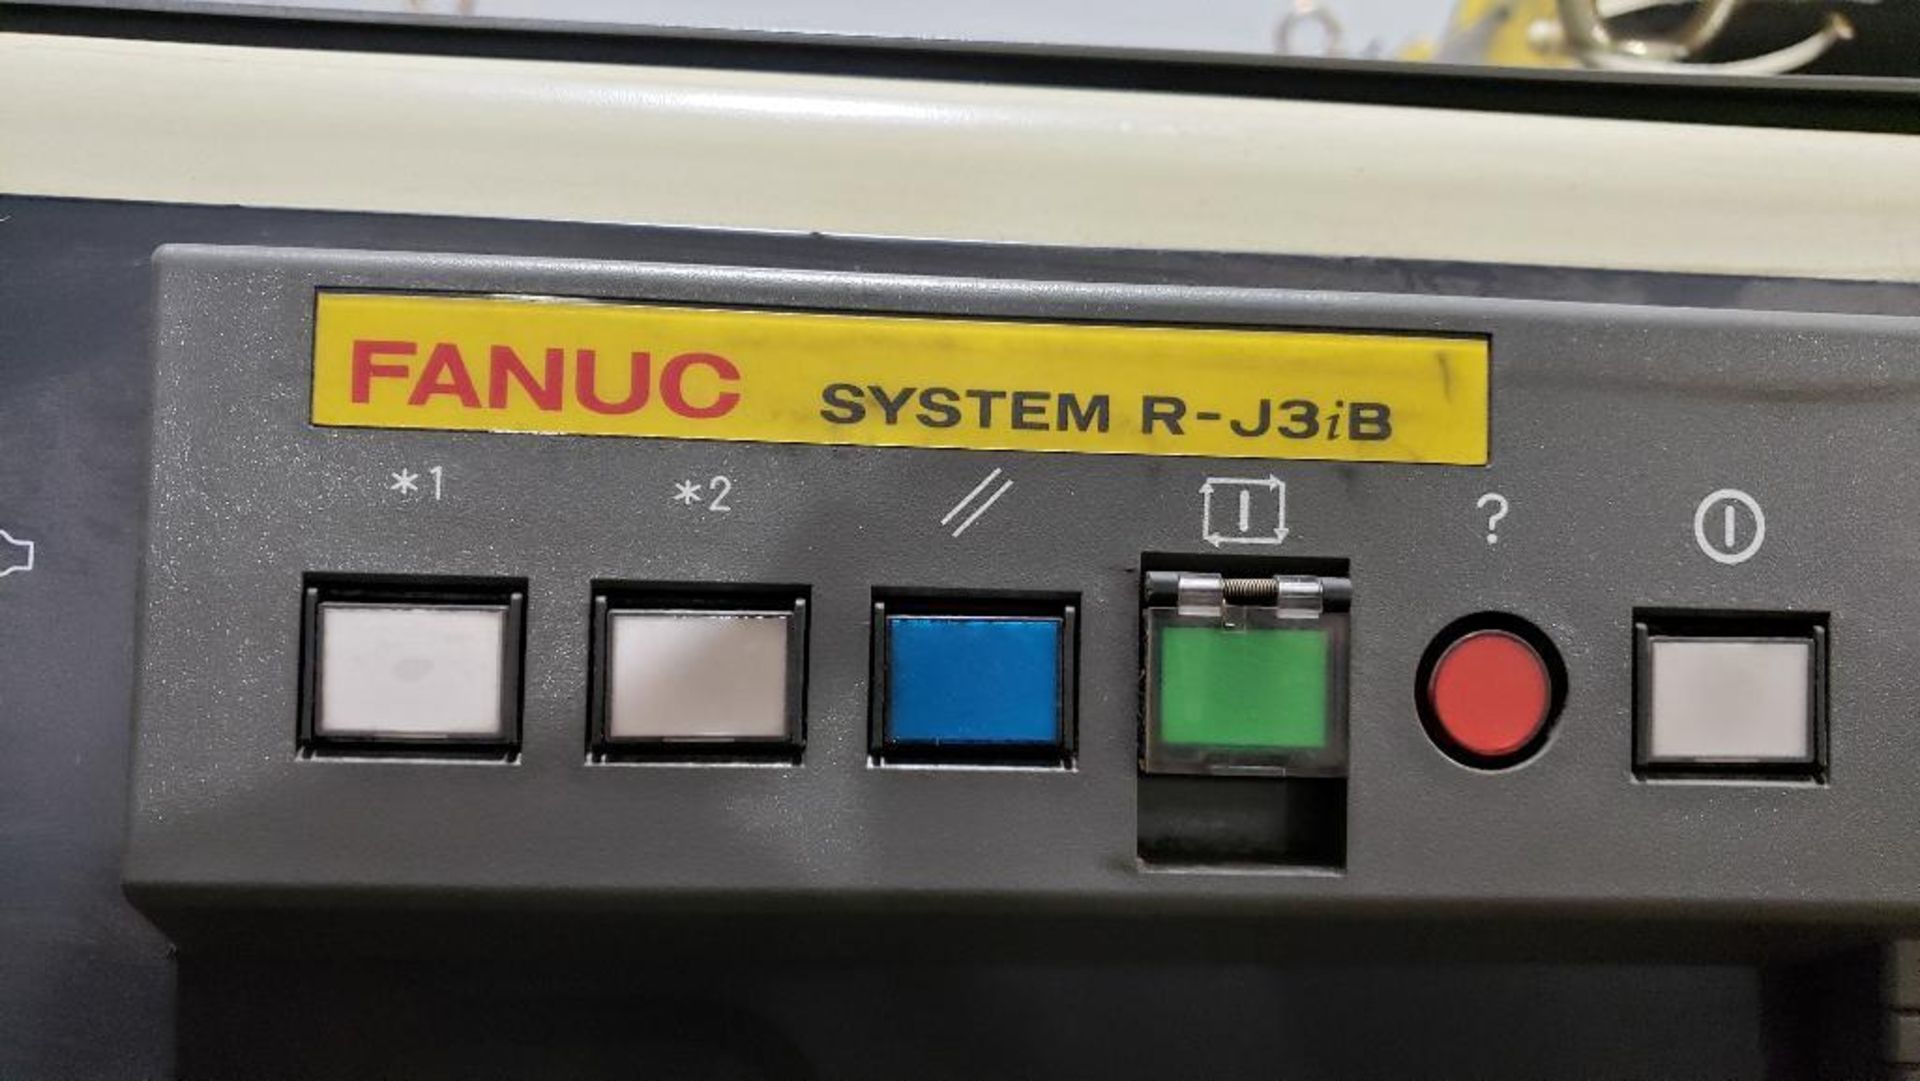 Fanuc R-2000iA/200F robot with Fanuc System R-J3iB controller. - Image 10 of 16